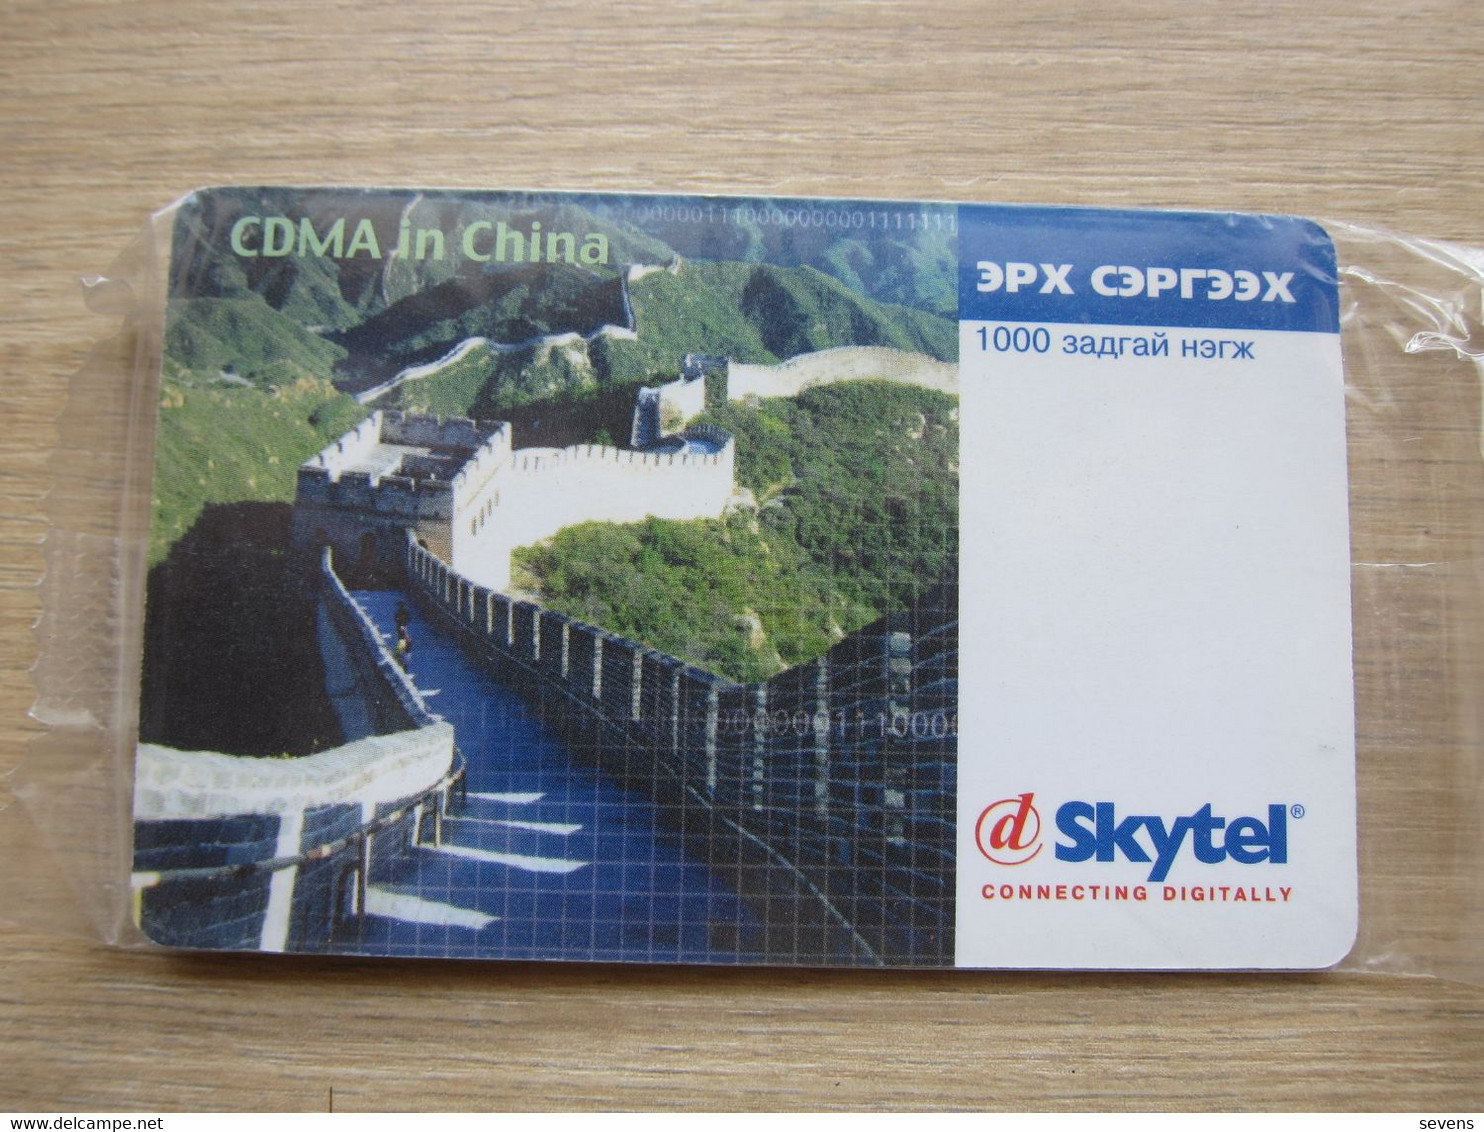 Skytel CDMA Prepaid Phonecard, The Great Wall, Mint In Blister Expired - Mongolië